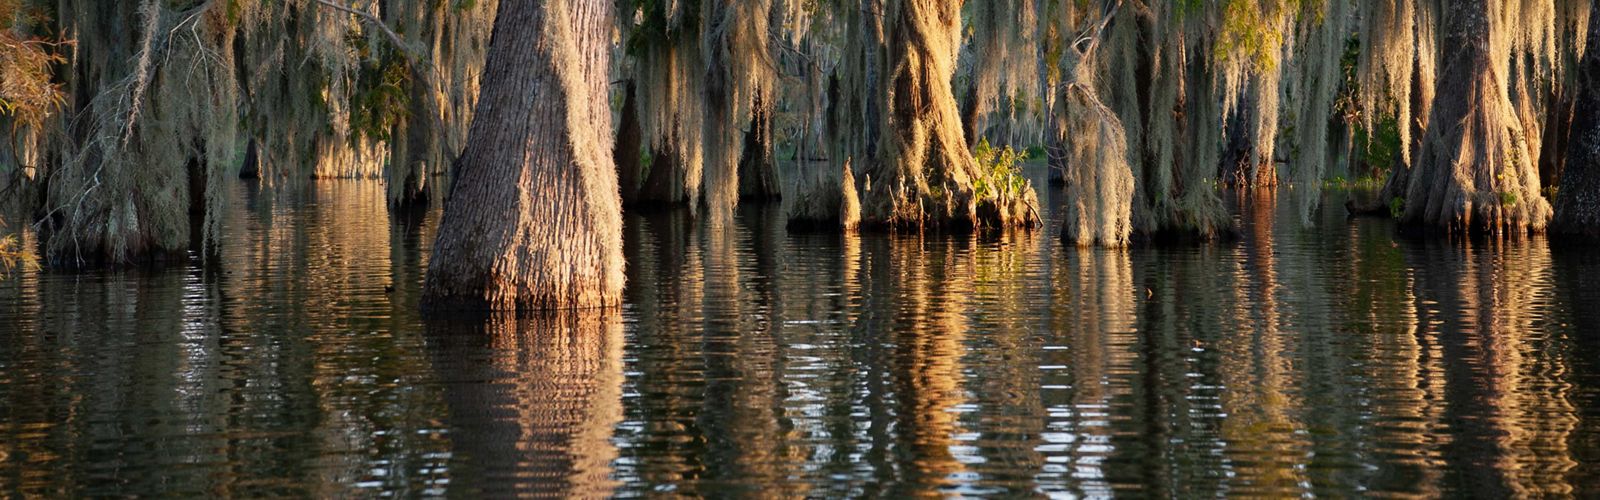 A group of large cypress trees grow in a river in Louisiana.